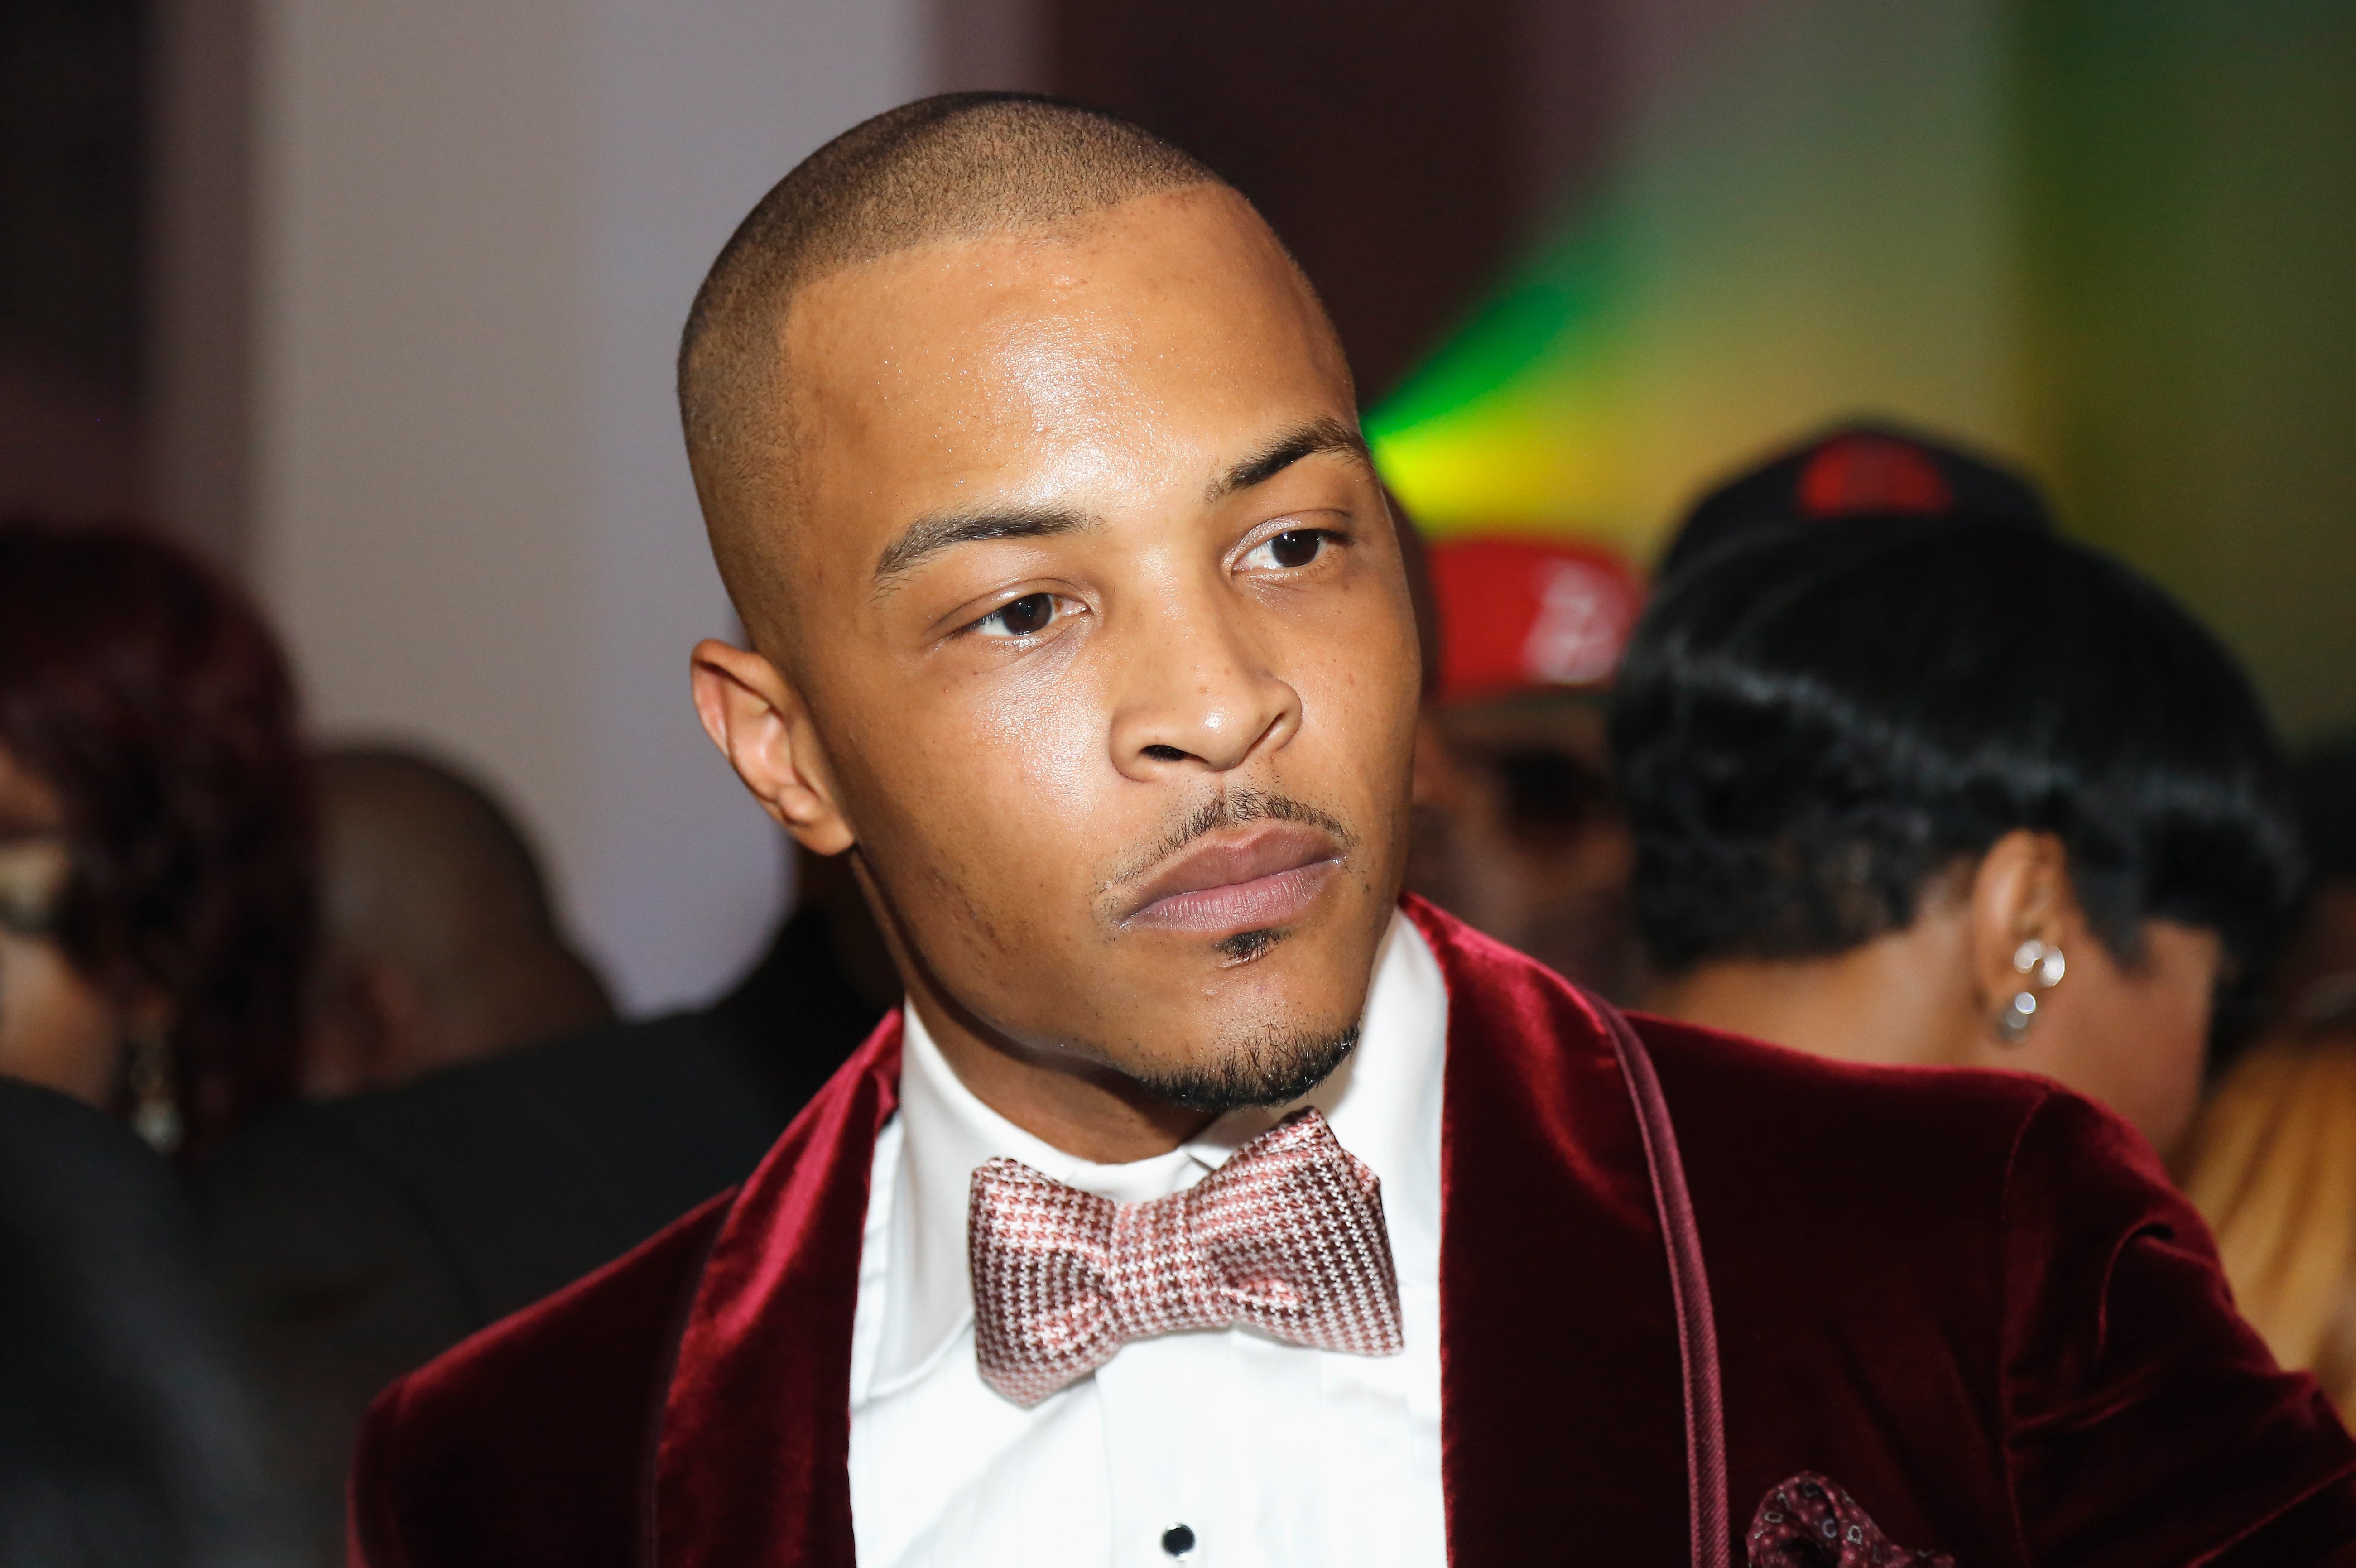 T.I. during his birthday party in September 2013. | Photo: Getty Images